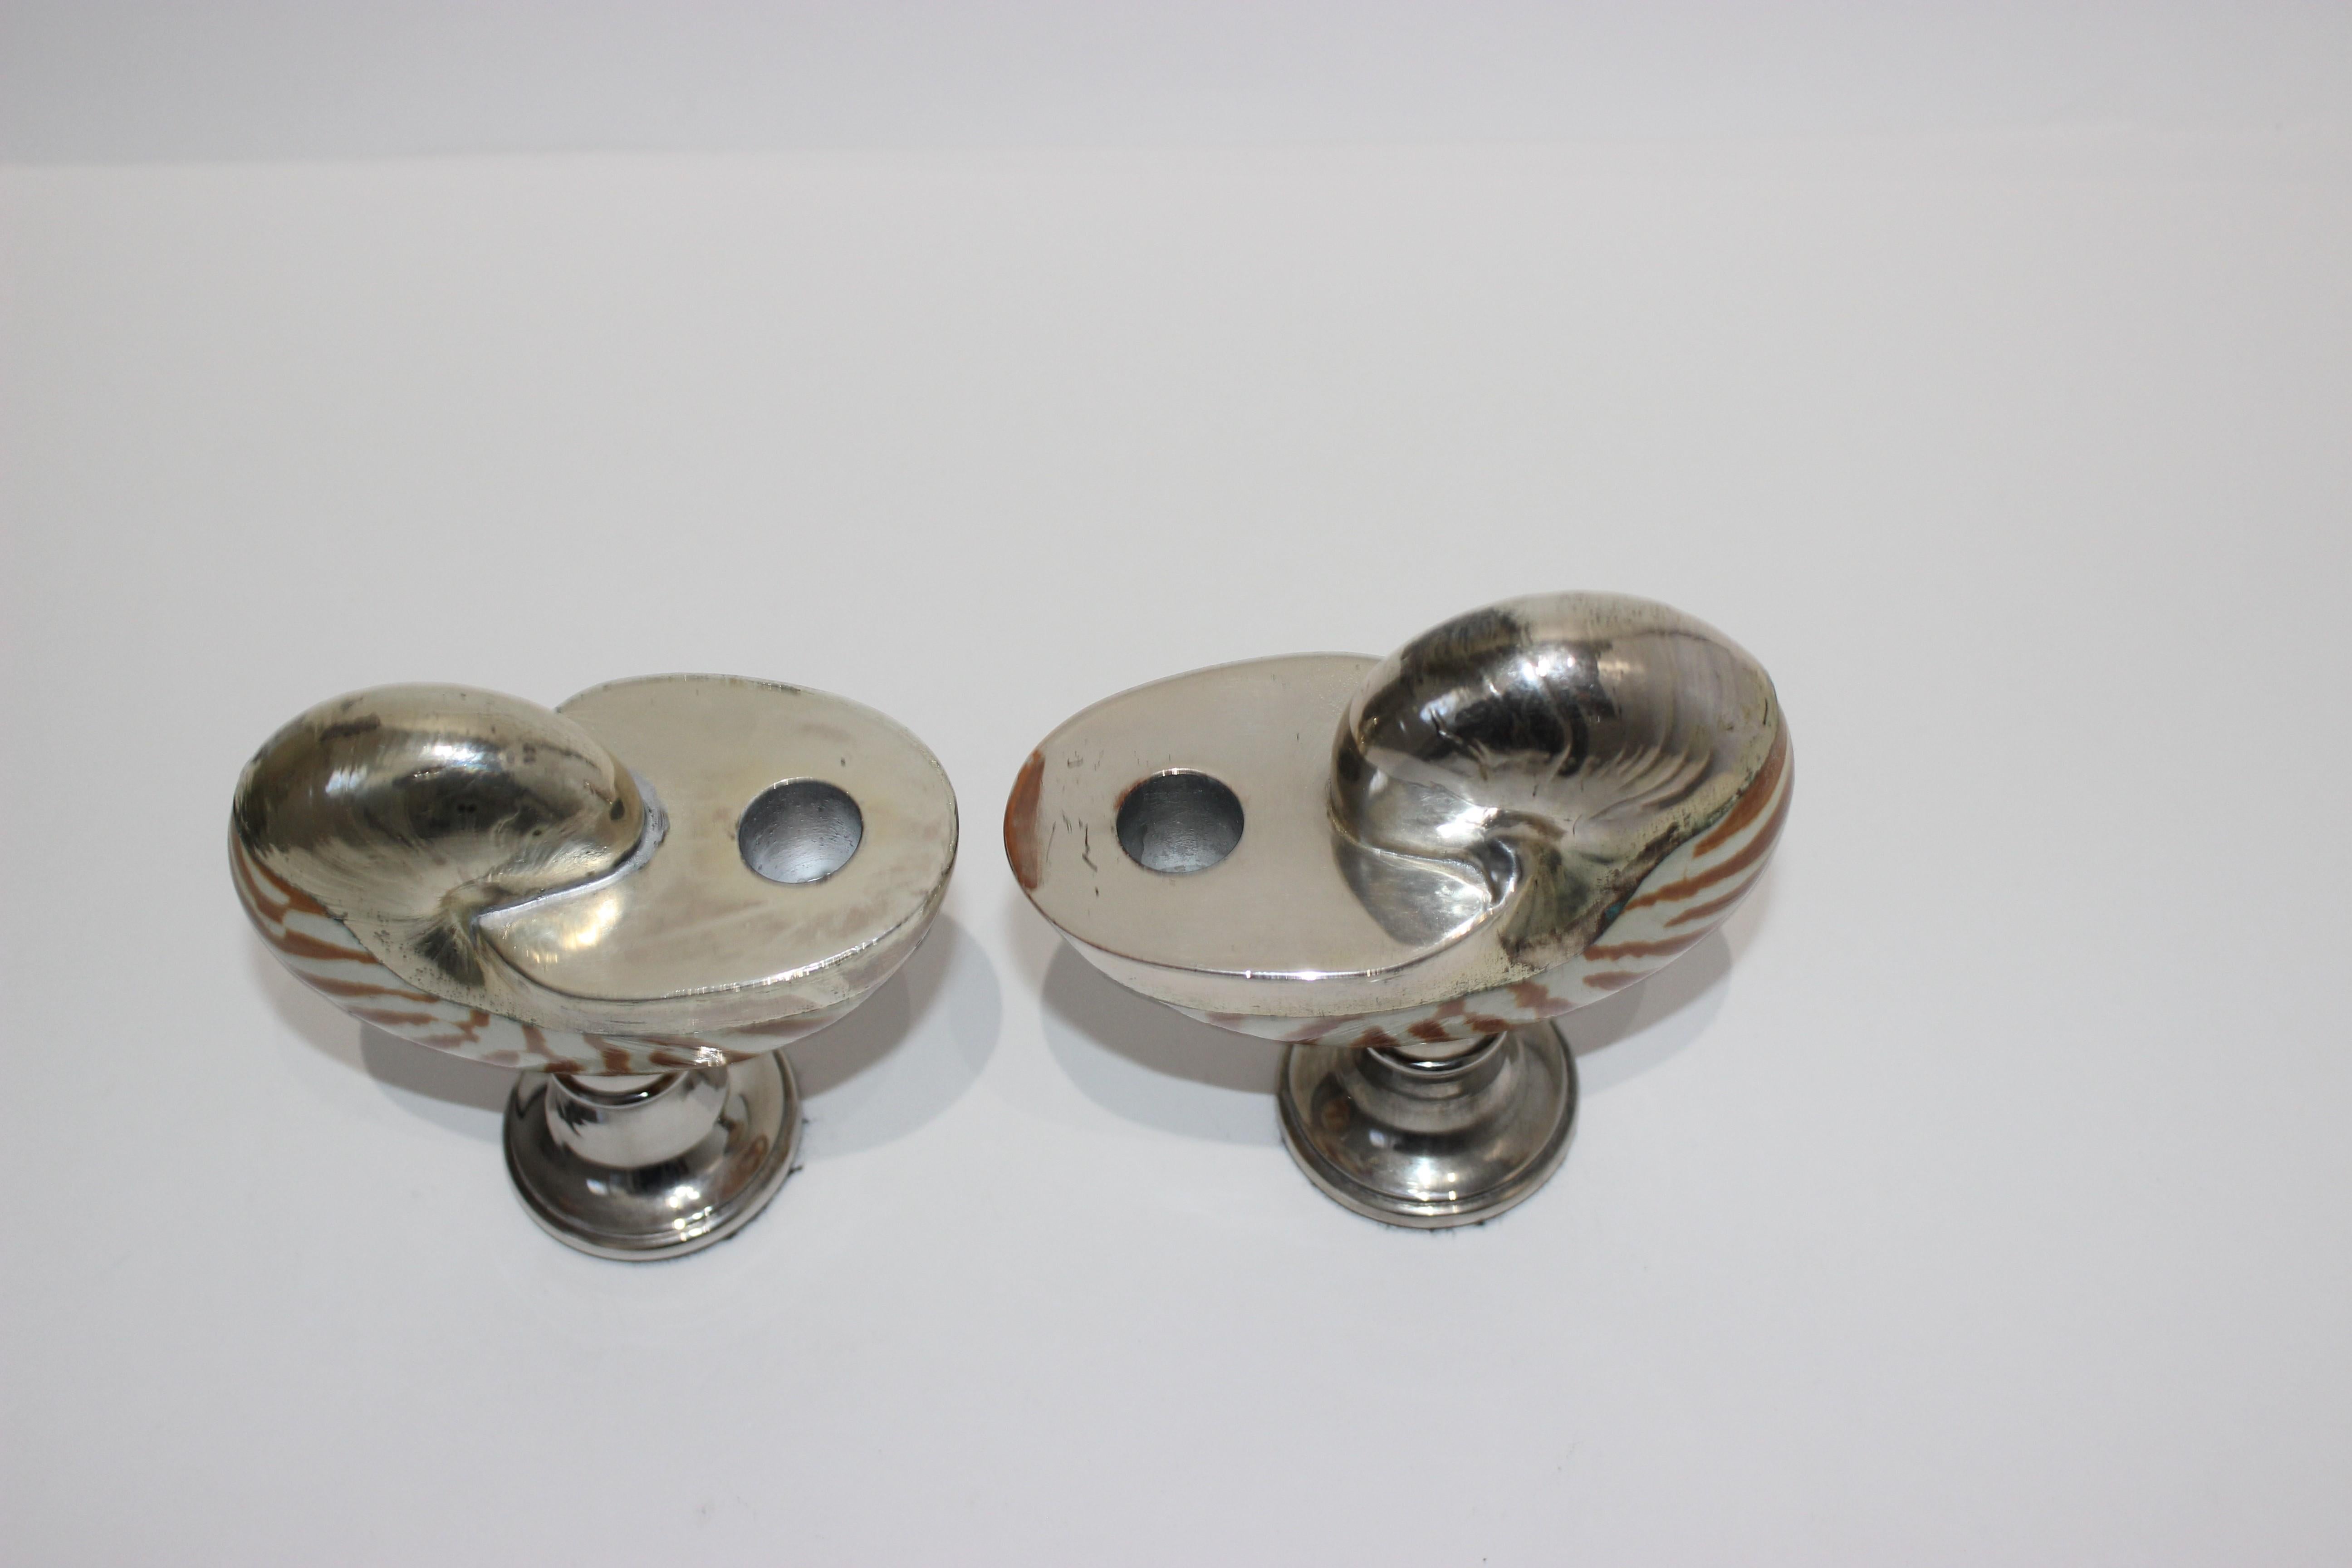 Rare and chic Italian 1950s Nautilus silver plated candleholders - a pair, acquired from a Palm Beach estate collection.

They are well matched but as very vintage natural specimens, vary slightly in size.

Measures: Larger: 5 1/2 high, 5 wide,